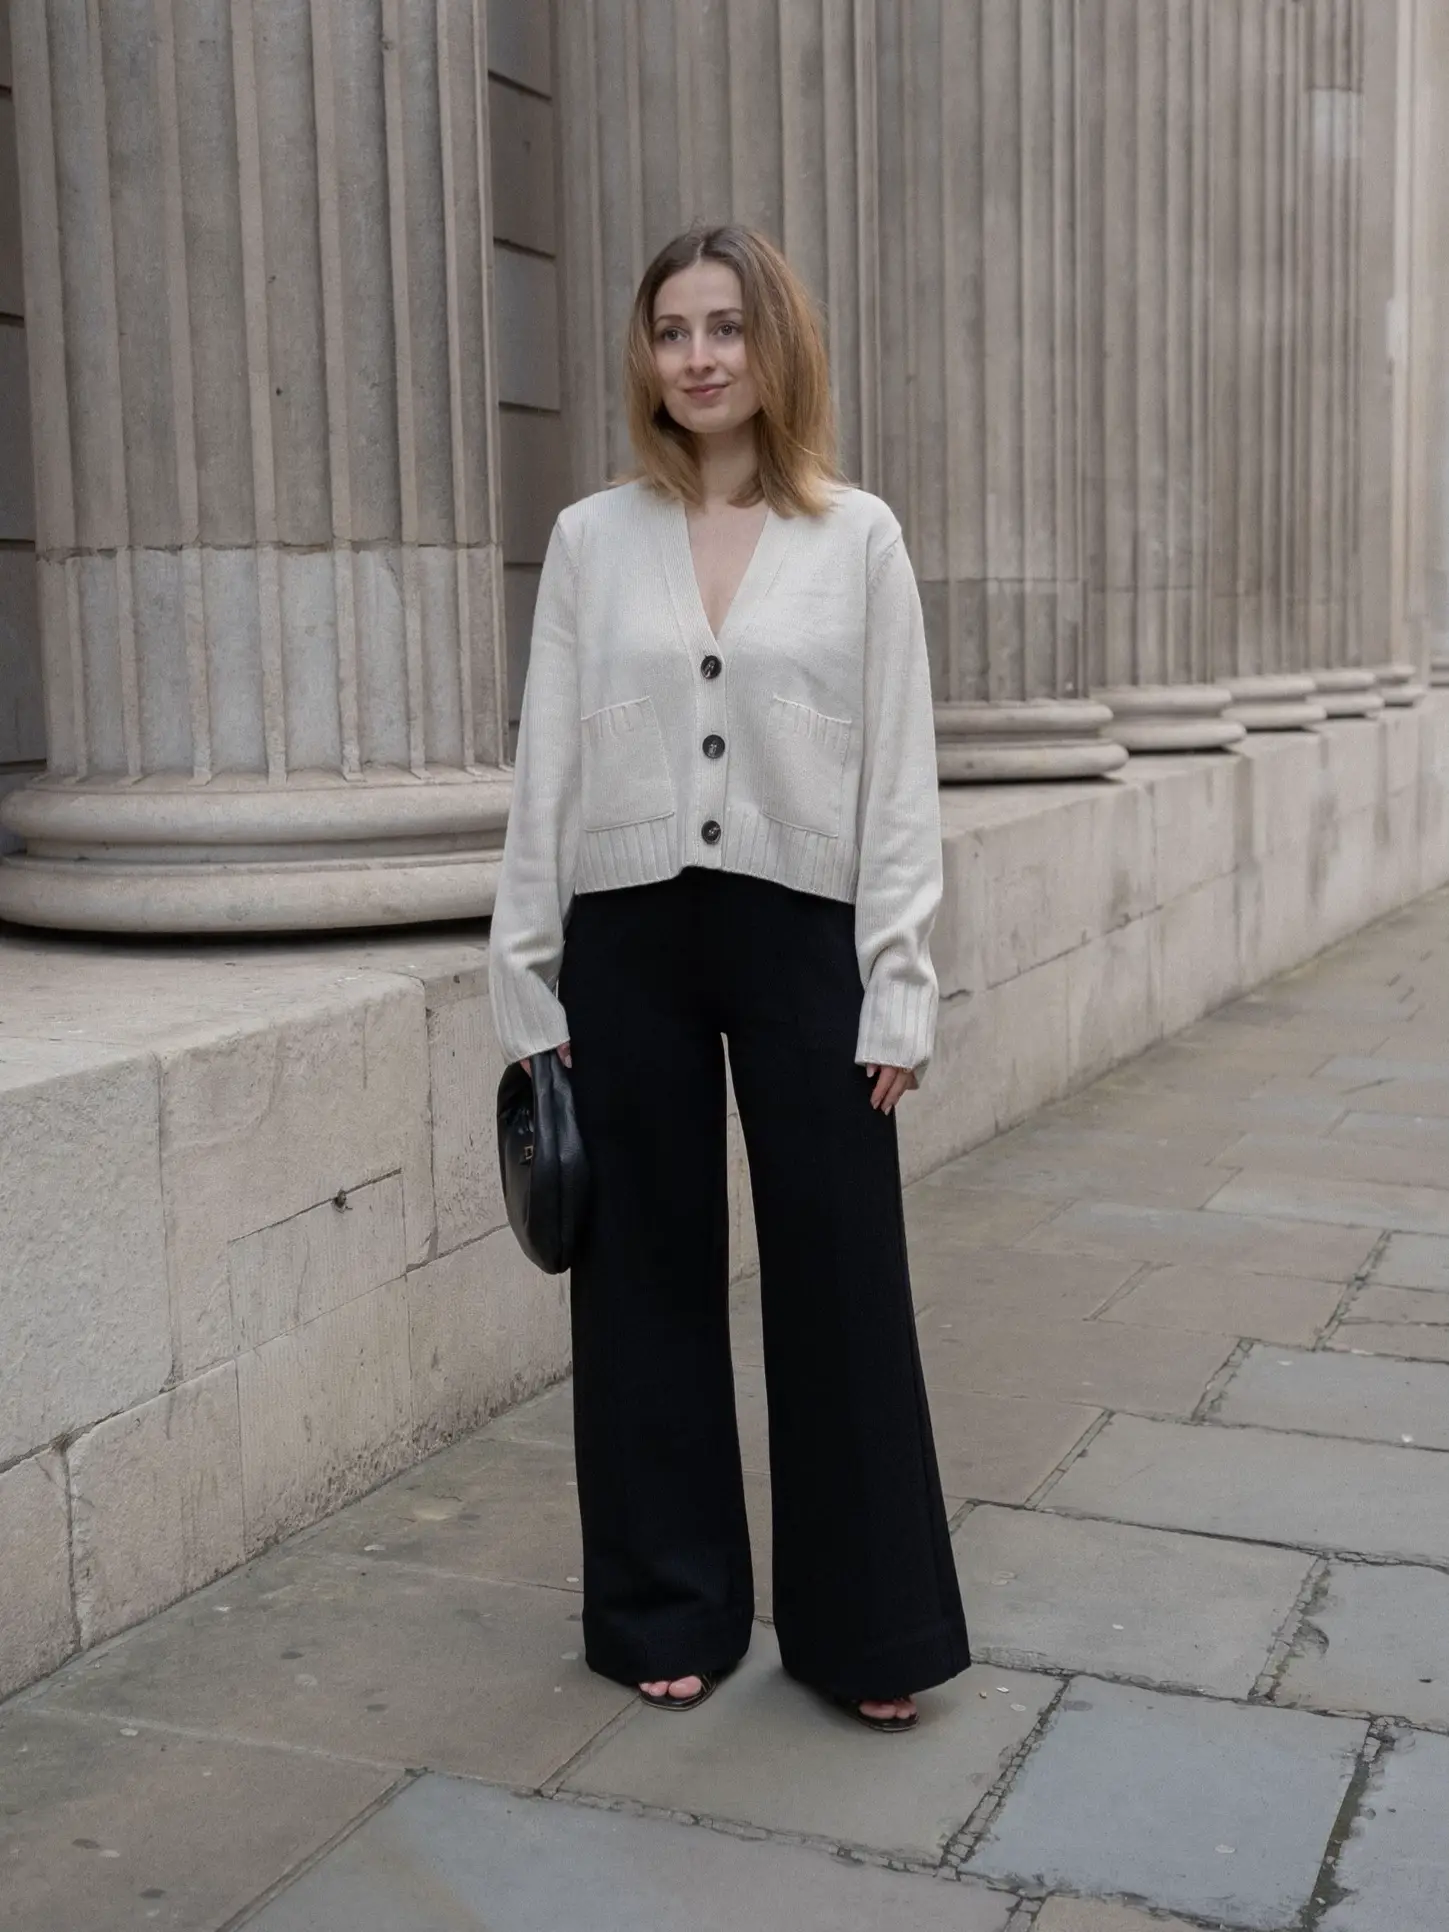 Pinterest Made Me Do It: Outfit with Flowy Plisse Palazzo Trousers